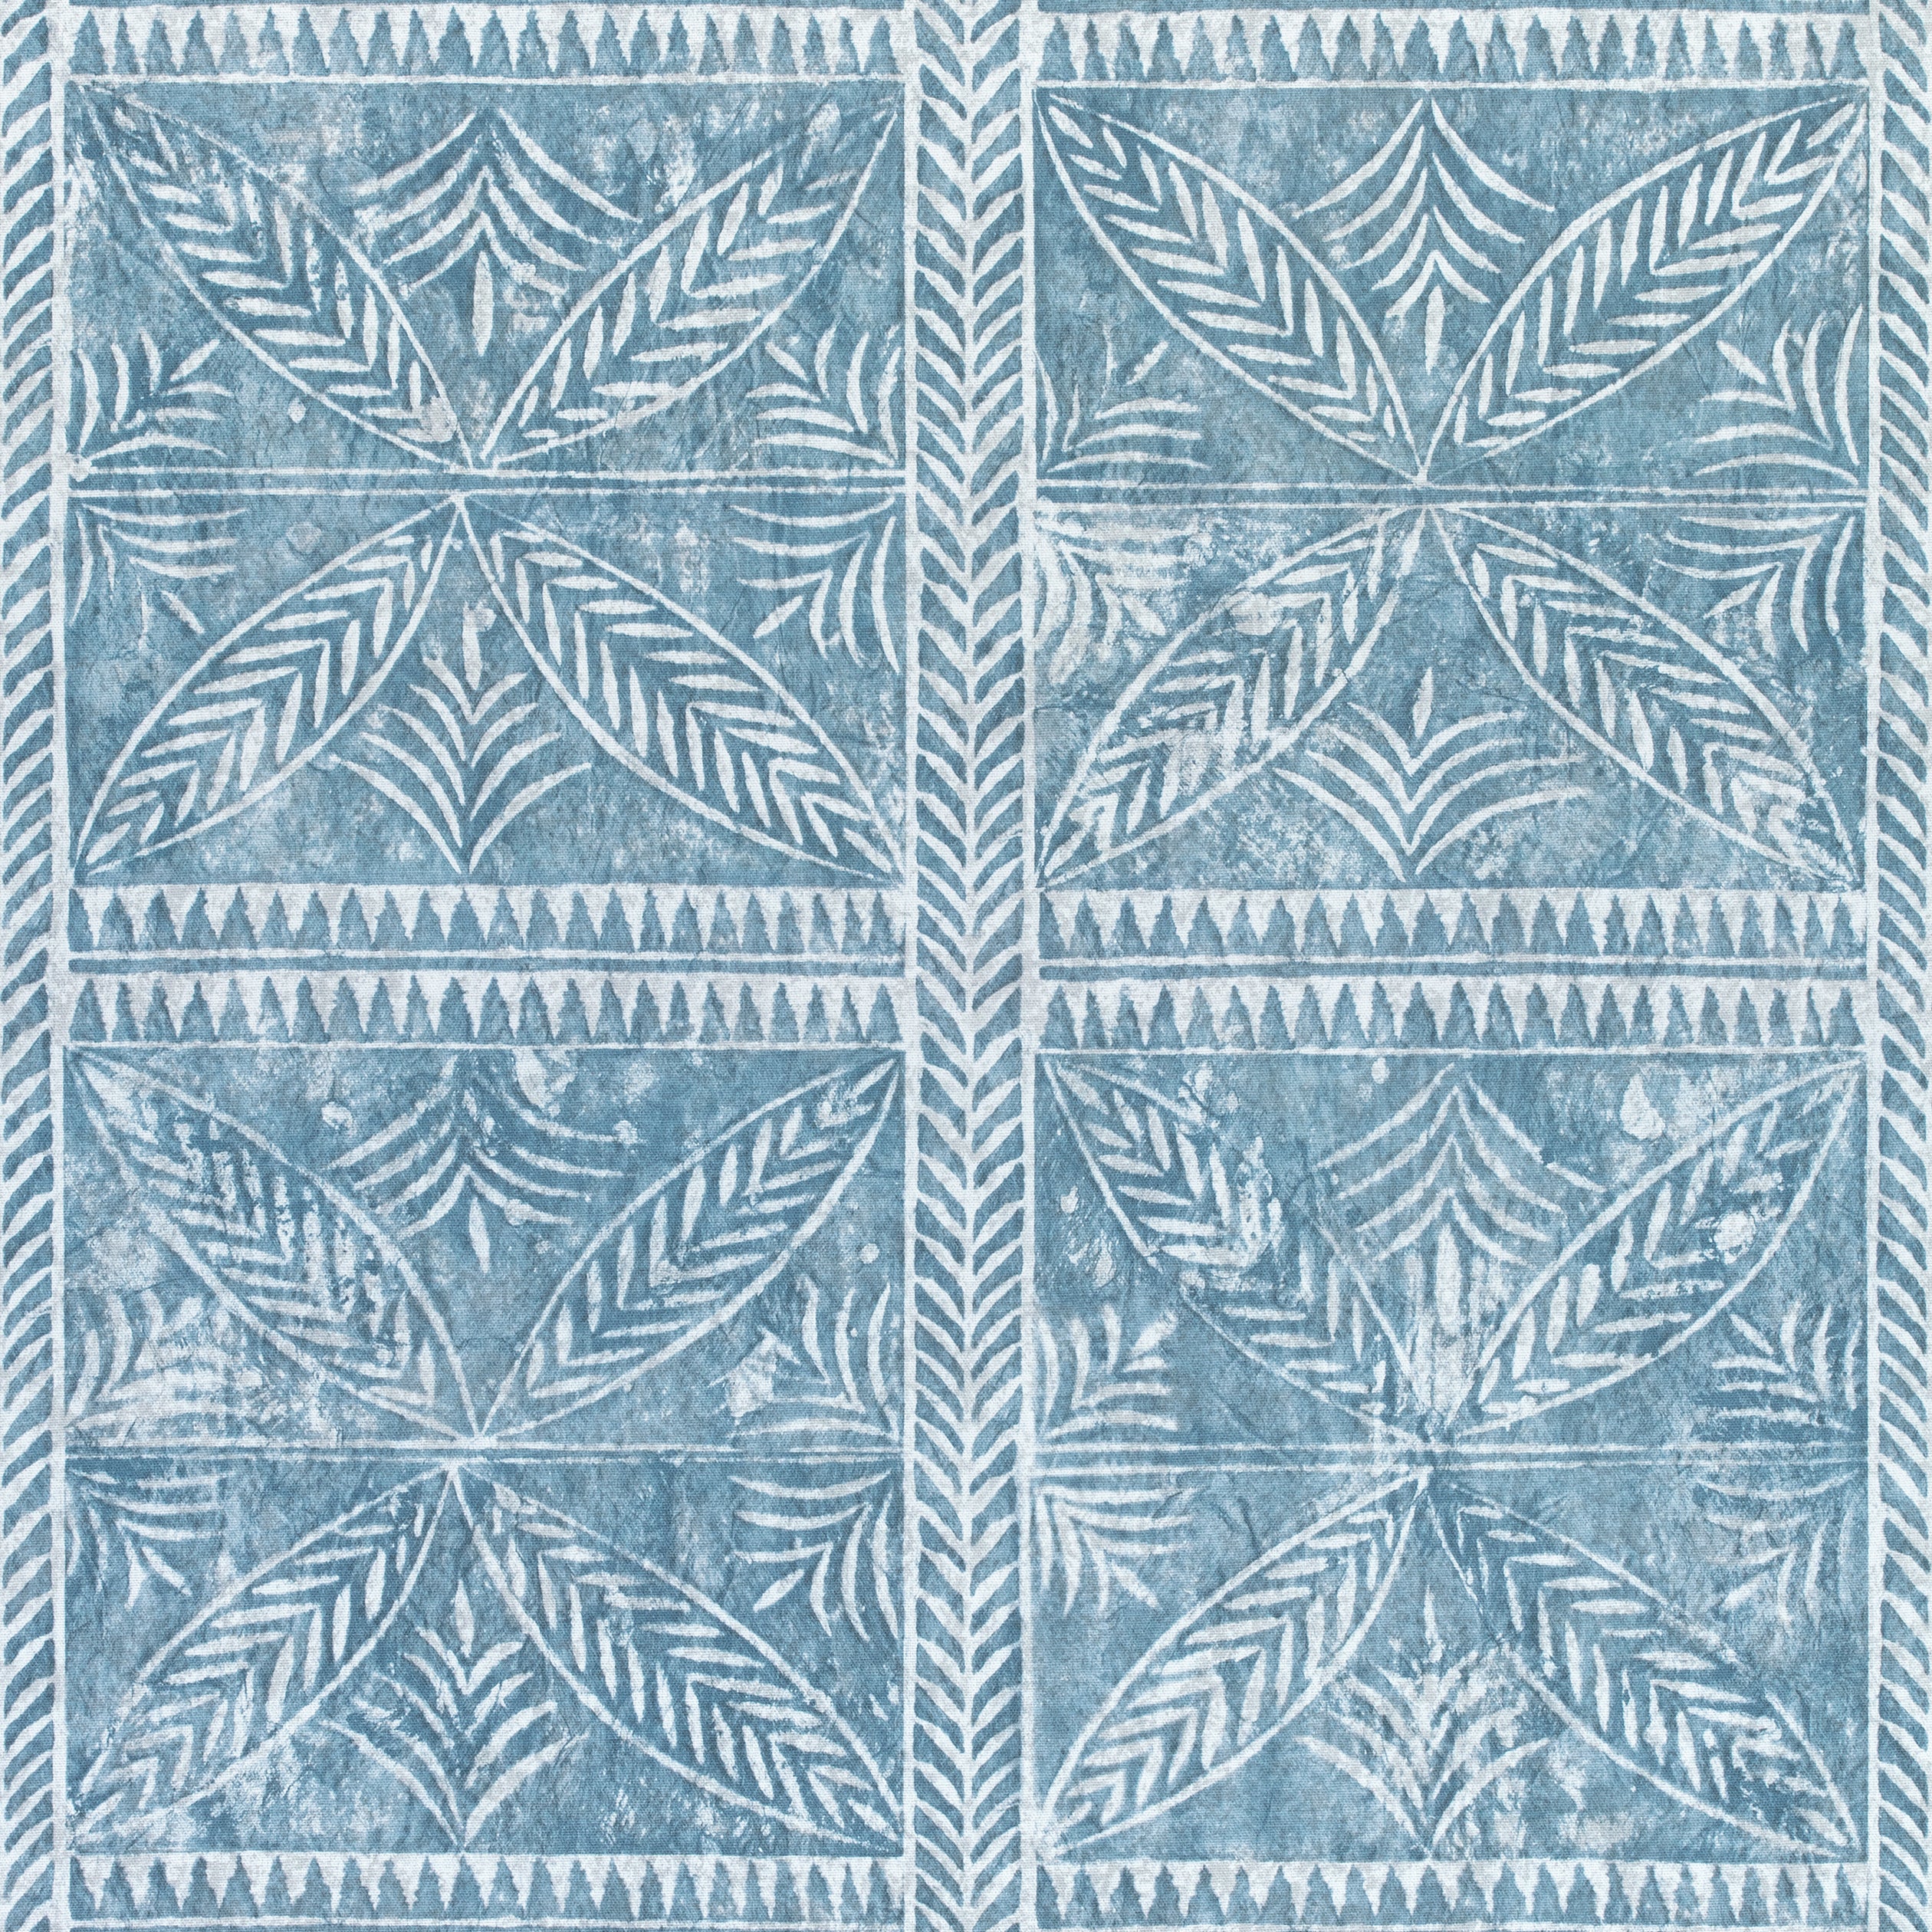 Timbuktu fabric in slate blue color - pattern number F910254 - by Thibaut in the Colony collection